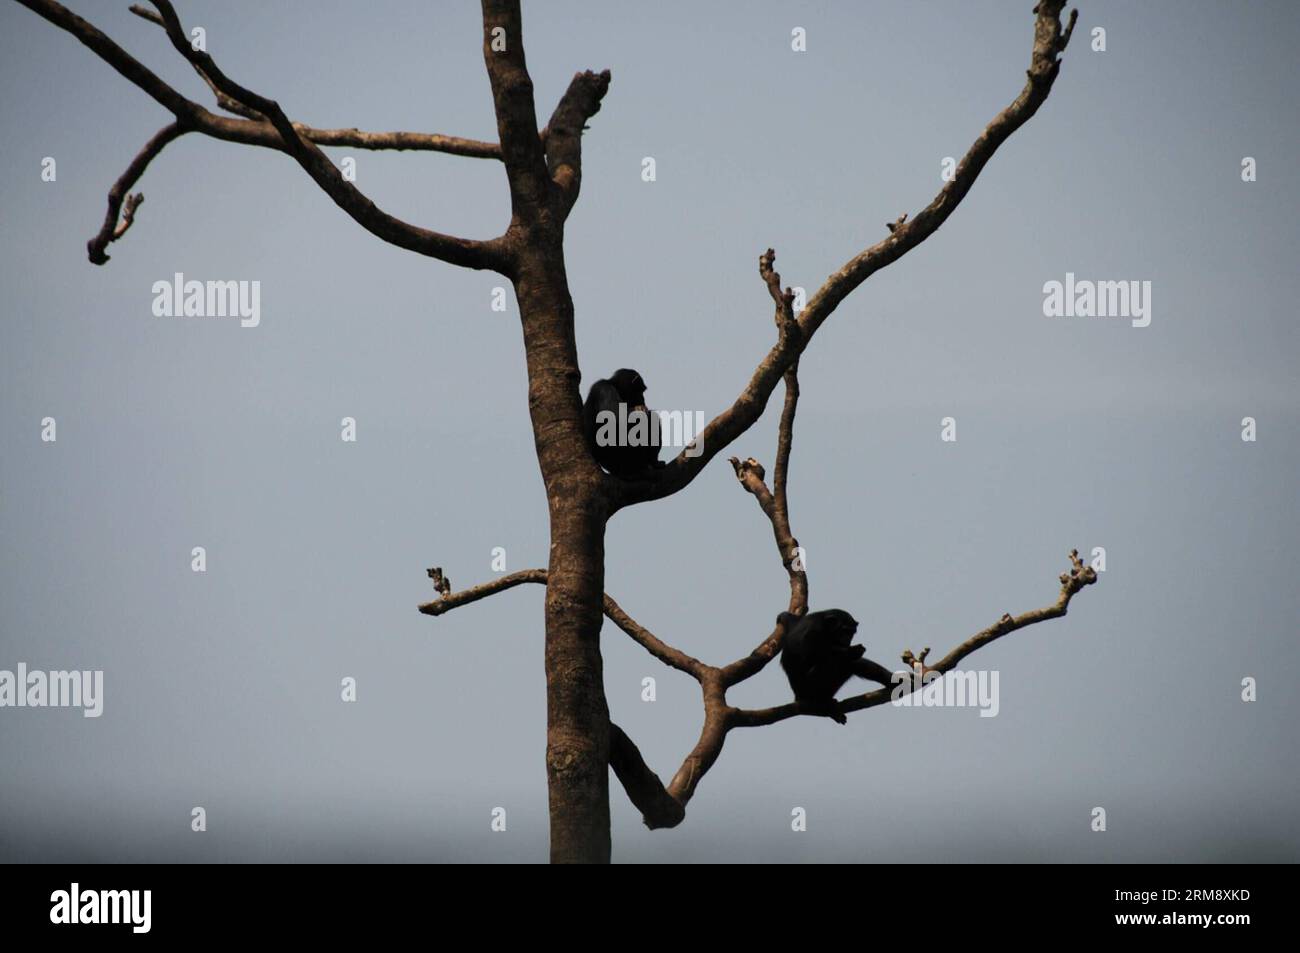 FREETOWN, April 28, 2014 (Xinhua) -- Some chimpanzees stay on the tree in Tacugama Chimpanzee Sanctuary of Sierra Leone, April 28, 2014. Located close to Freetown, the capital of Sierra Leone, Tacugama Chimpanzee Sanctuary covers 0.4 square kilometers of the 176.88 square kilometers Western Area Peninsula Forest Reserve. Established by Bala Amarasekaran in 1995, Tacugama now cares for over 100 chimpanzees under the work of nearly 30 staffs in several forested enclosures. (Xinhua/Lin Xiaowei) SIERRA LEONE-CHIMPANZEE-SANCTUARY PUBLICATIONxNOTxINxCHN   Freetown April 28 2014 XINHUA Some chimpanze Stock Photo